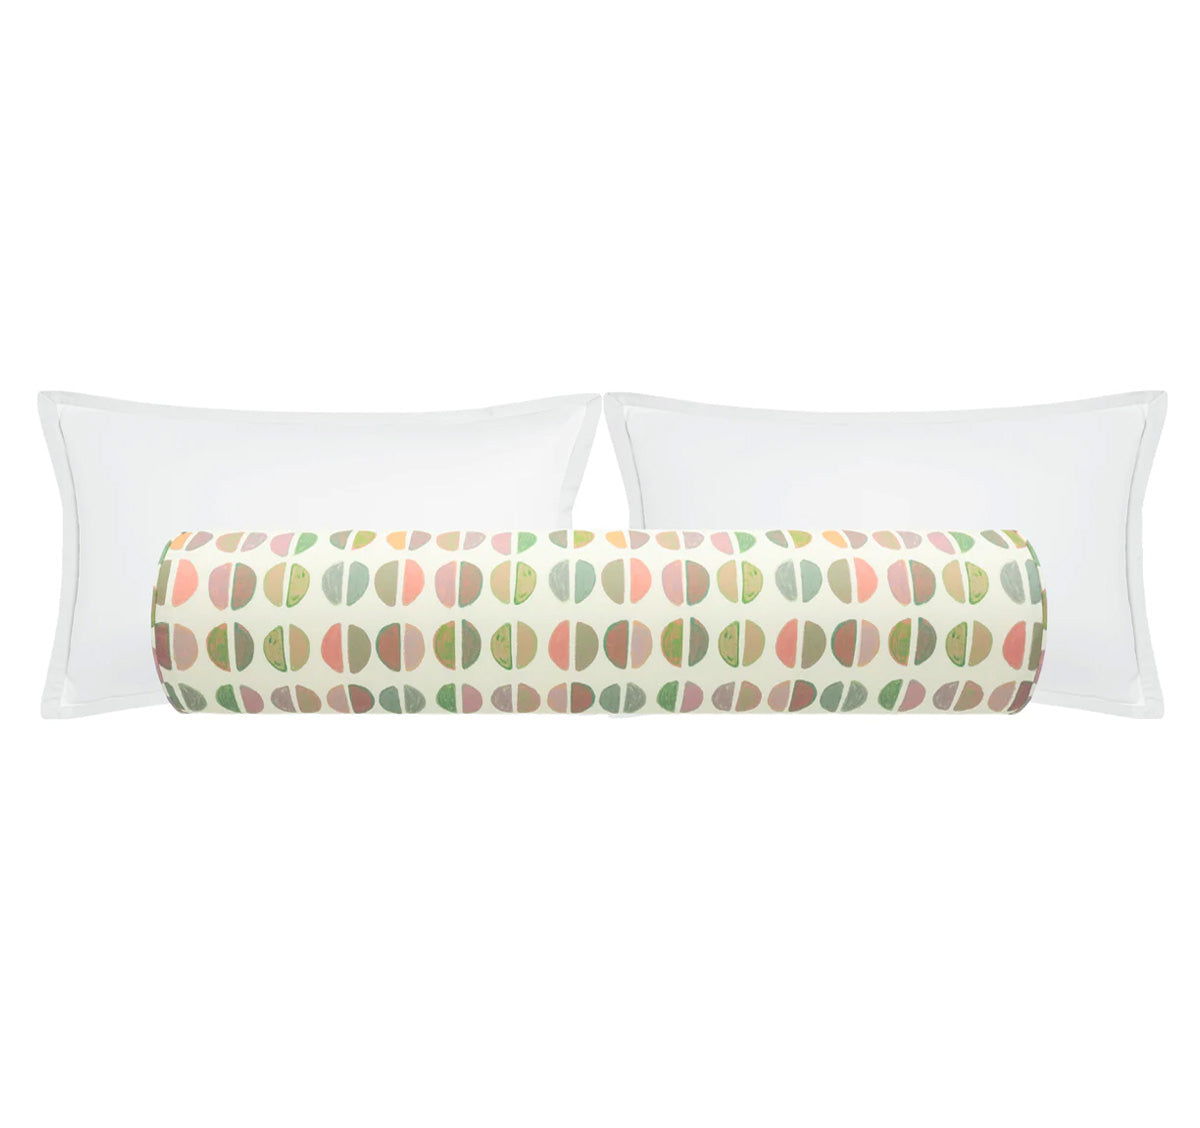 THE BOLSTER :: 9" X 48" MIMS // MULTI | LULIE WALLACE